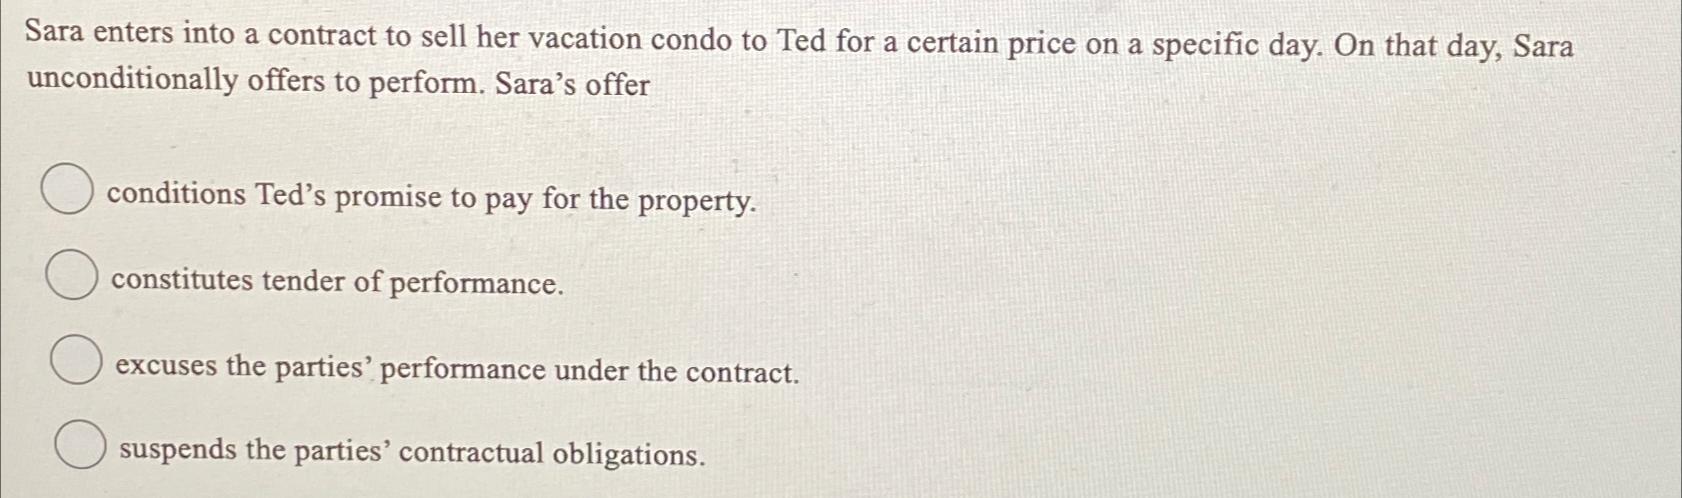 Sara enters into a contract to sell her vacation condo to Ted for a certain price on a specific day. On that